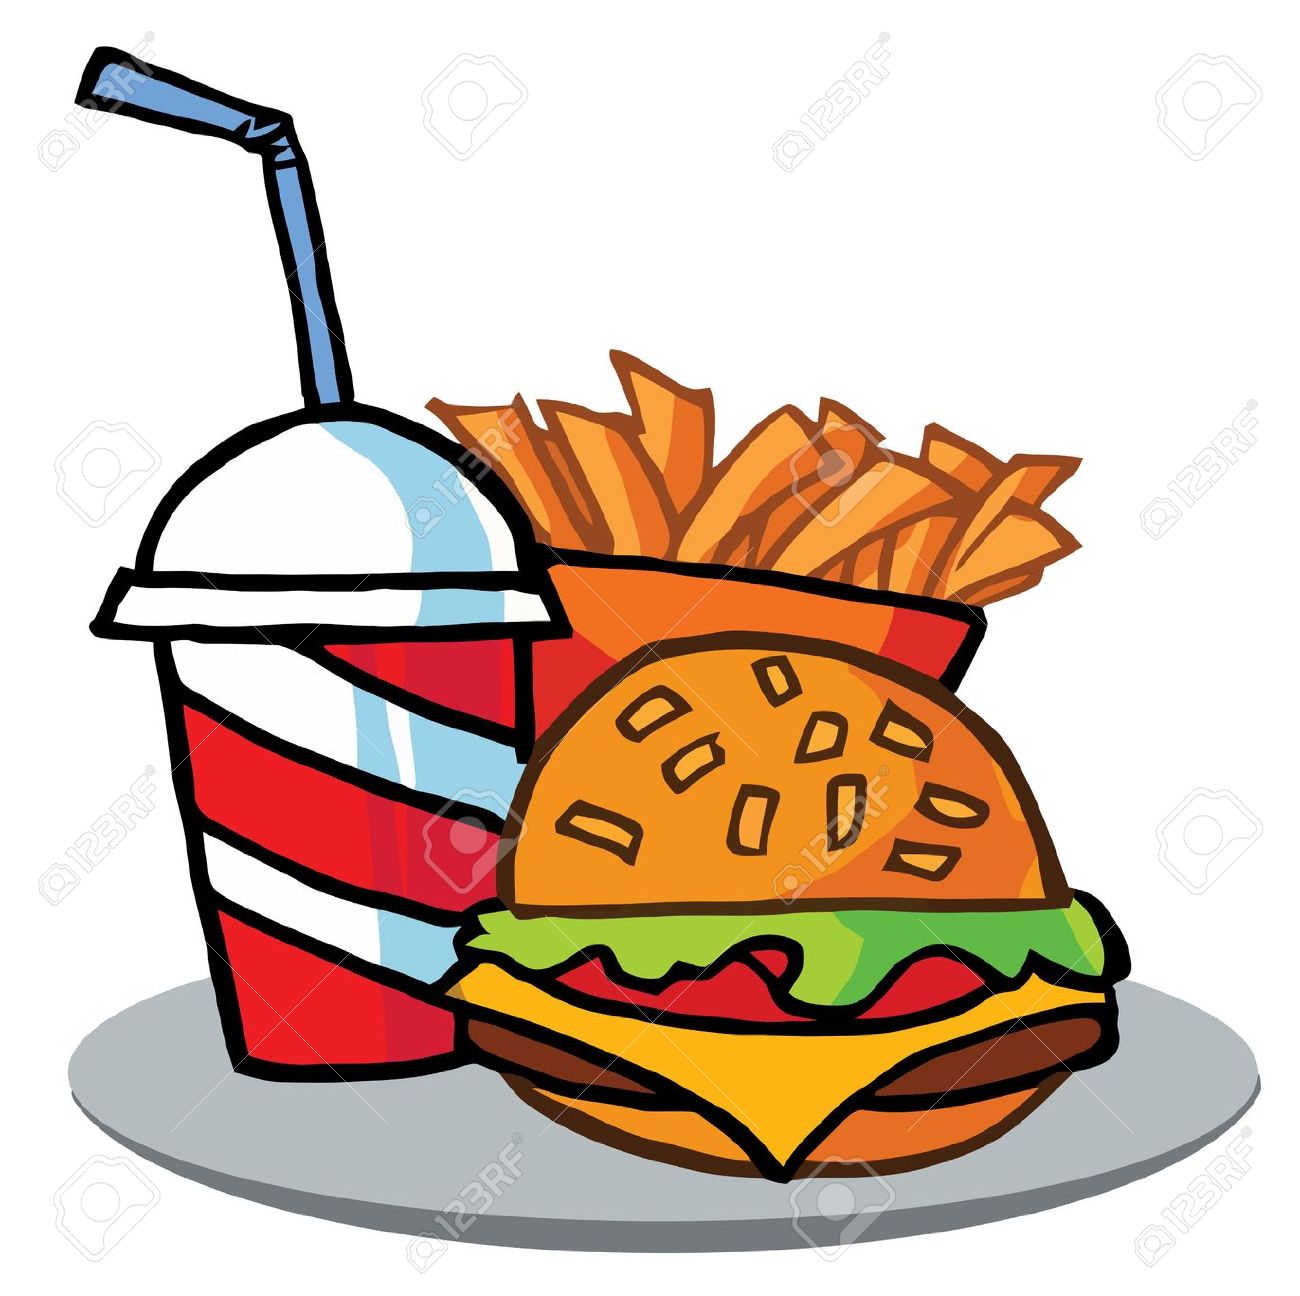 fast food clipart pictures - photo #23